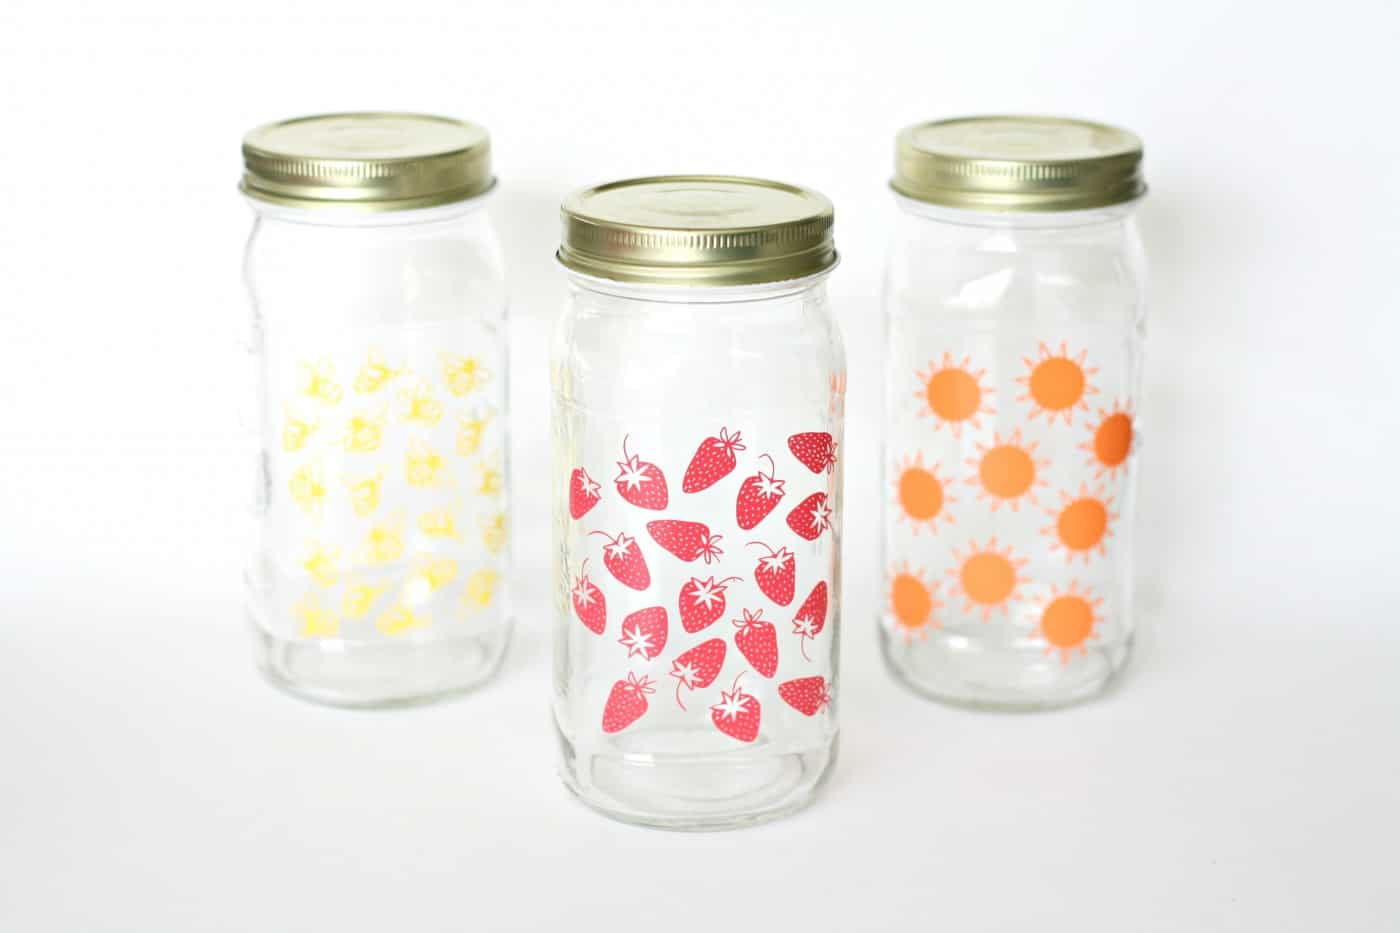 Simple Glass Jar Crafts for Summer (Too Cute!)